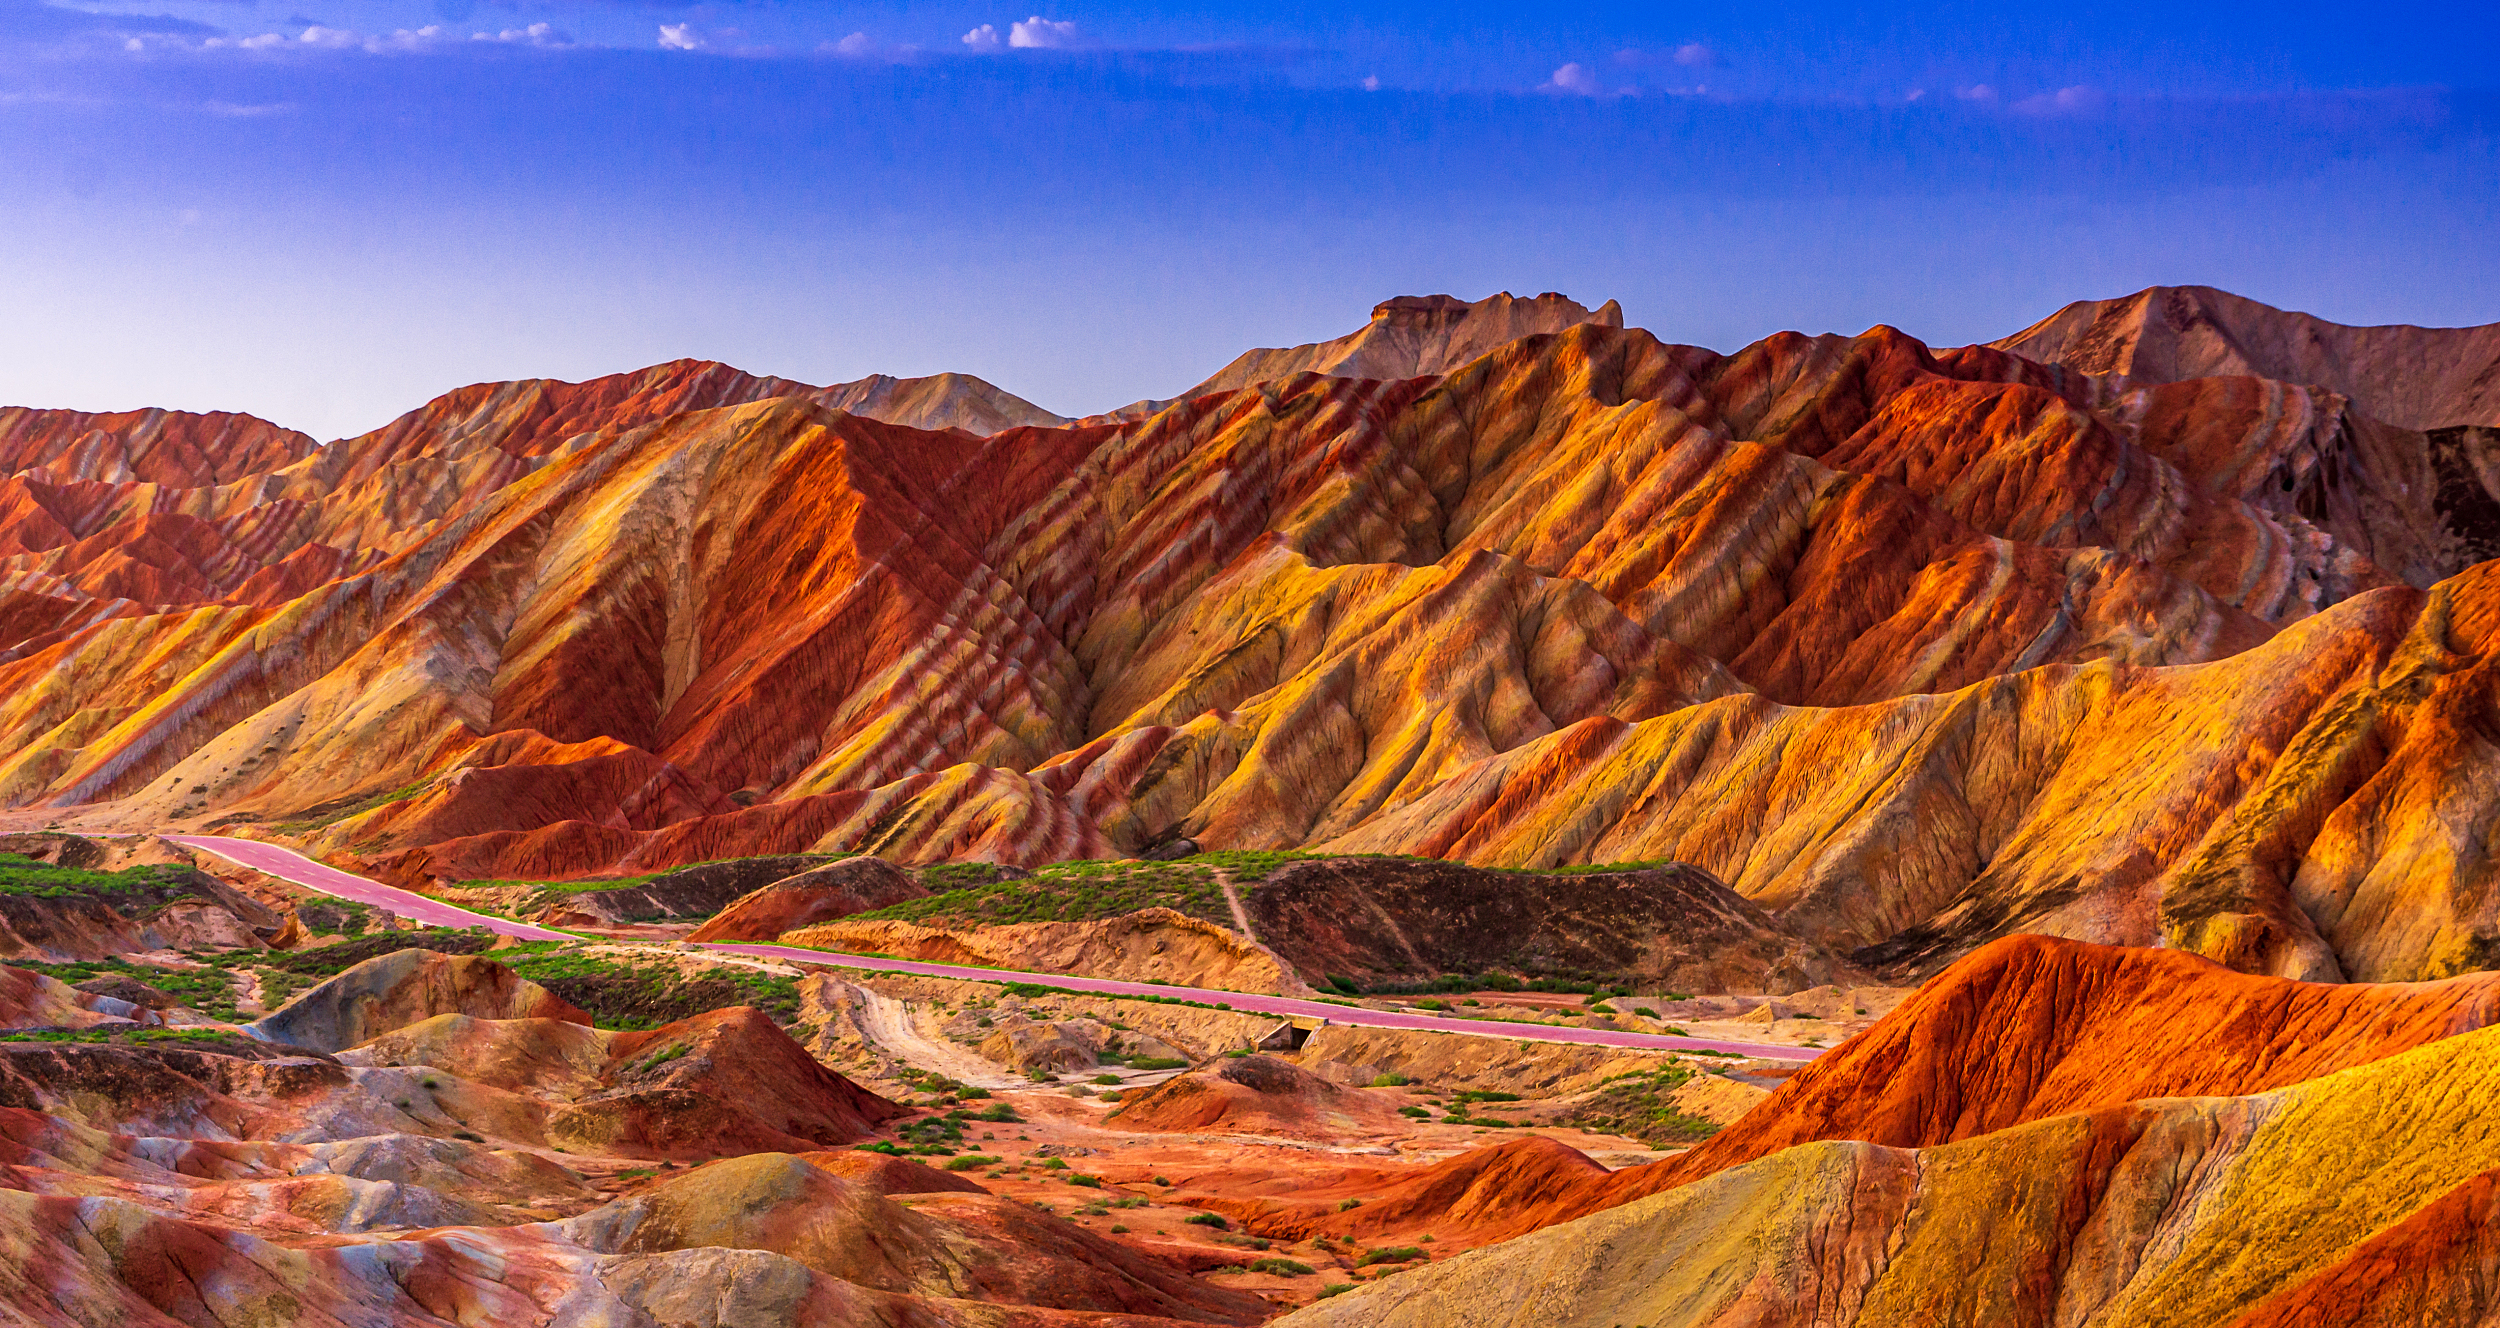 49-facts-about-zhangye